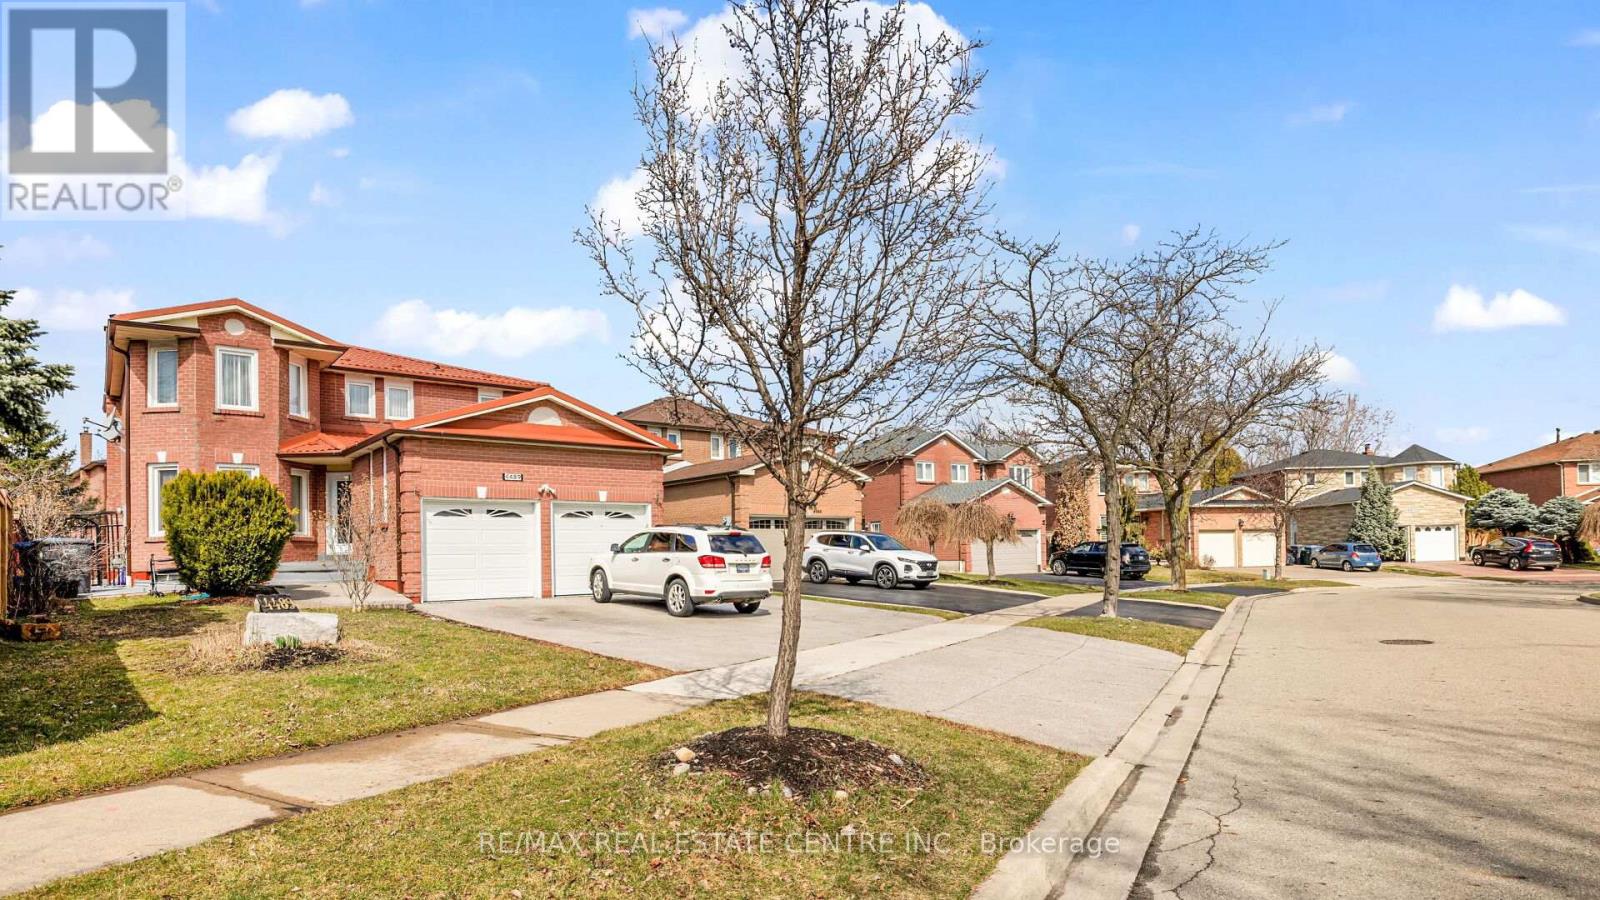 4489 Weymouth Commons Crescent, Mississauga, 6 Bedrooms Bedrooms, ,4 BathroomsBathrooms,Single Family,For Sale,Weymouth Commons,W8147494